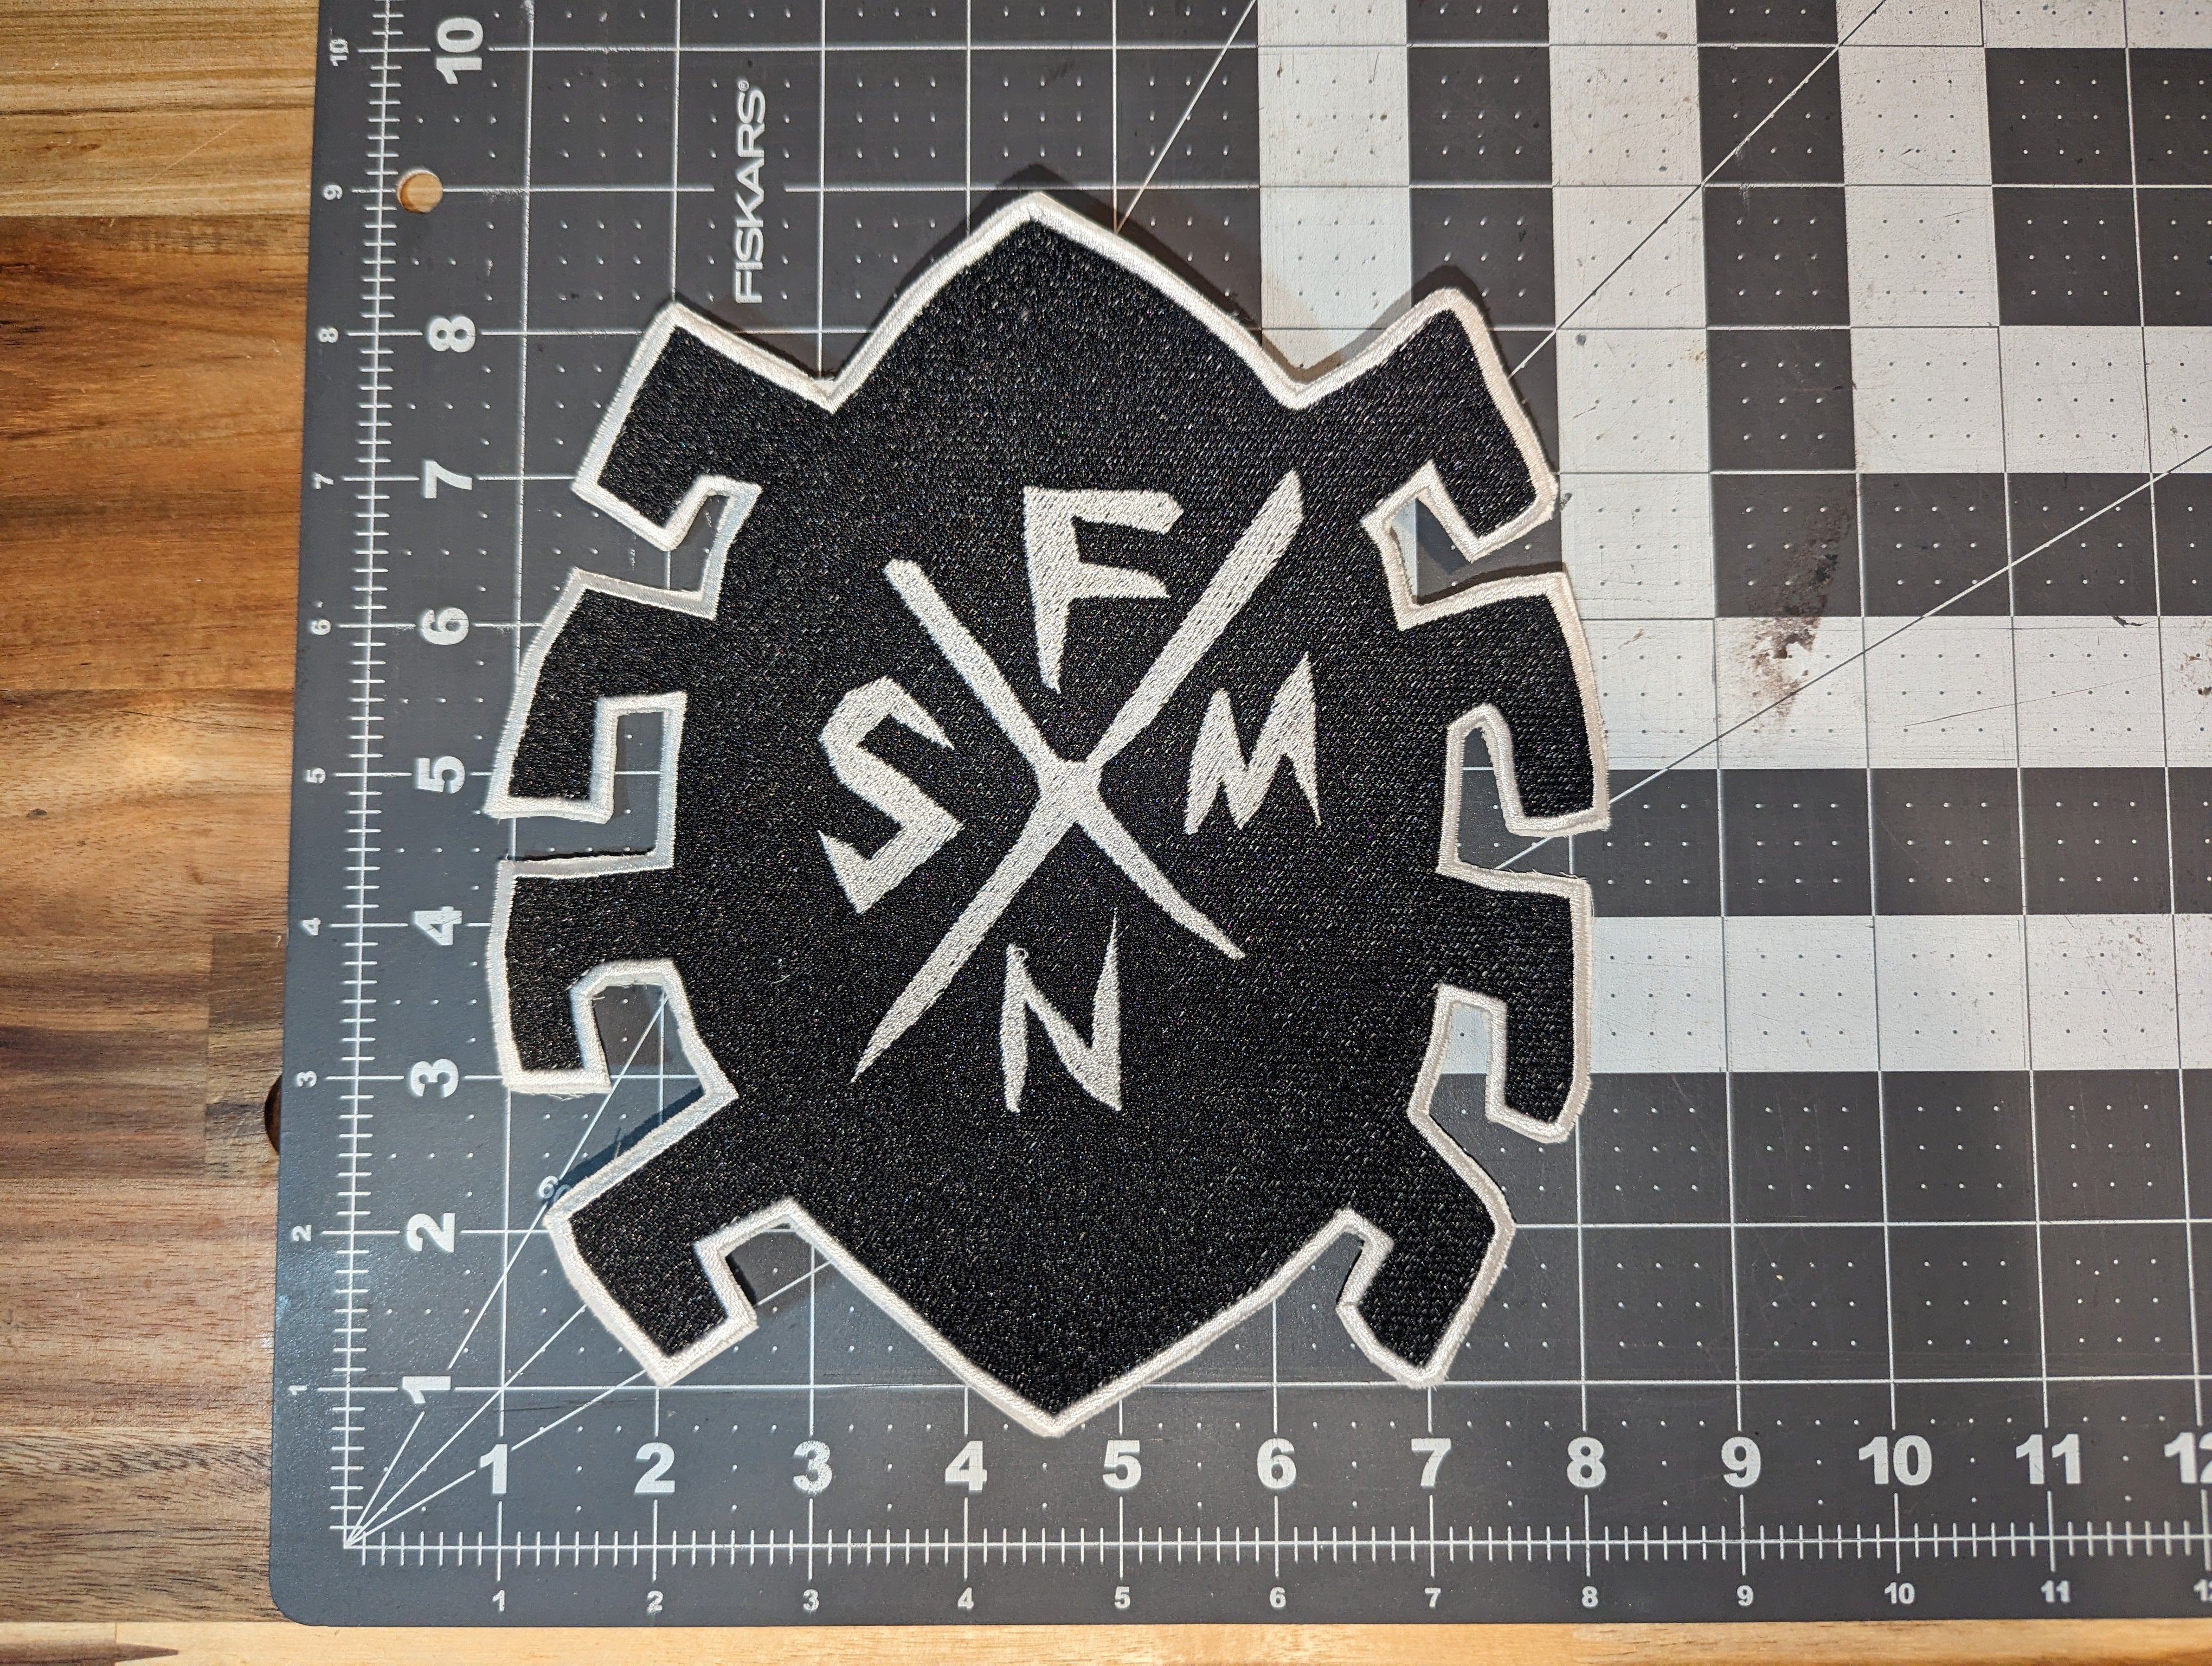 Spider-Punk Iron On Patches